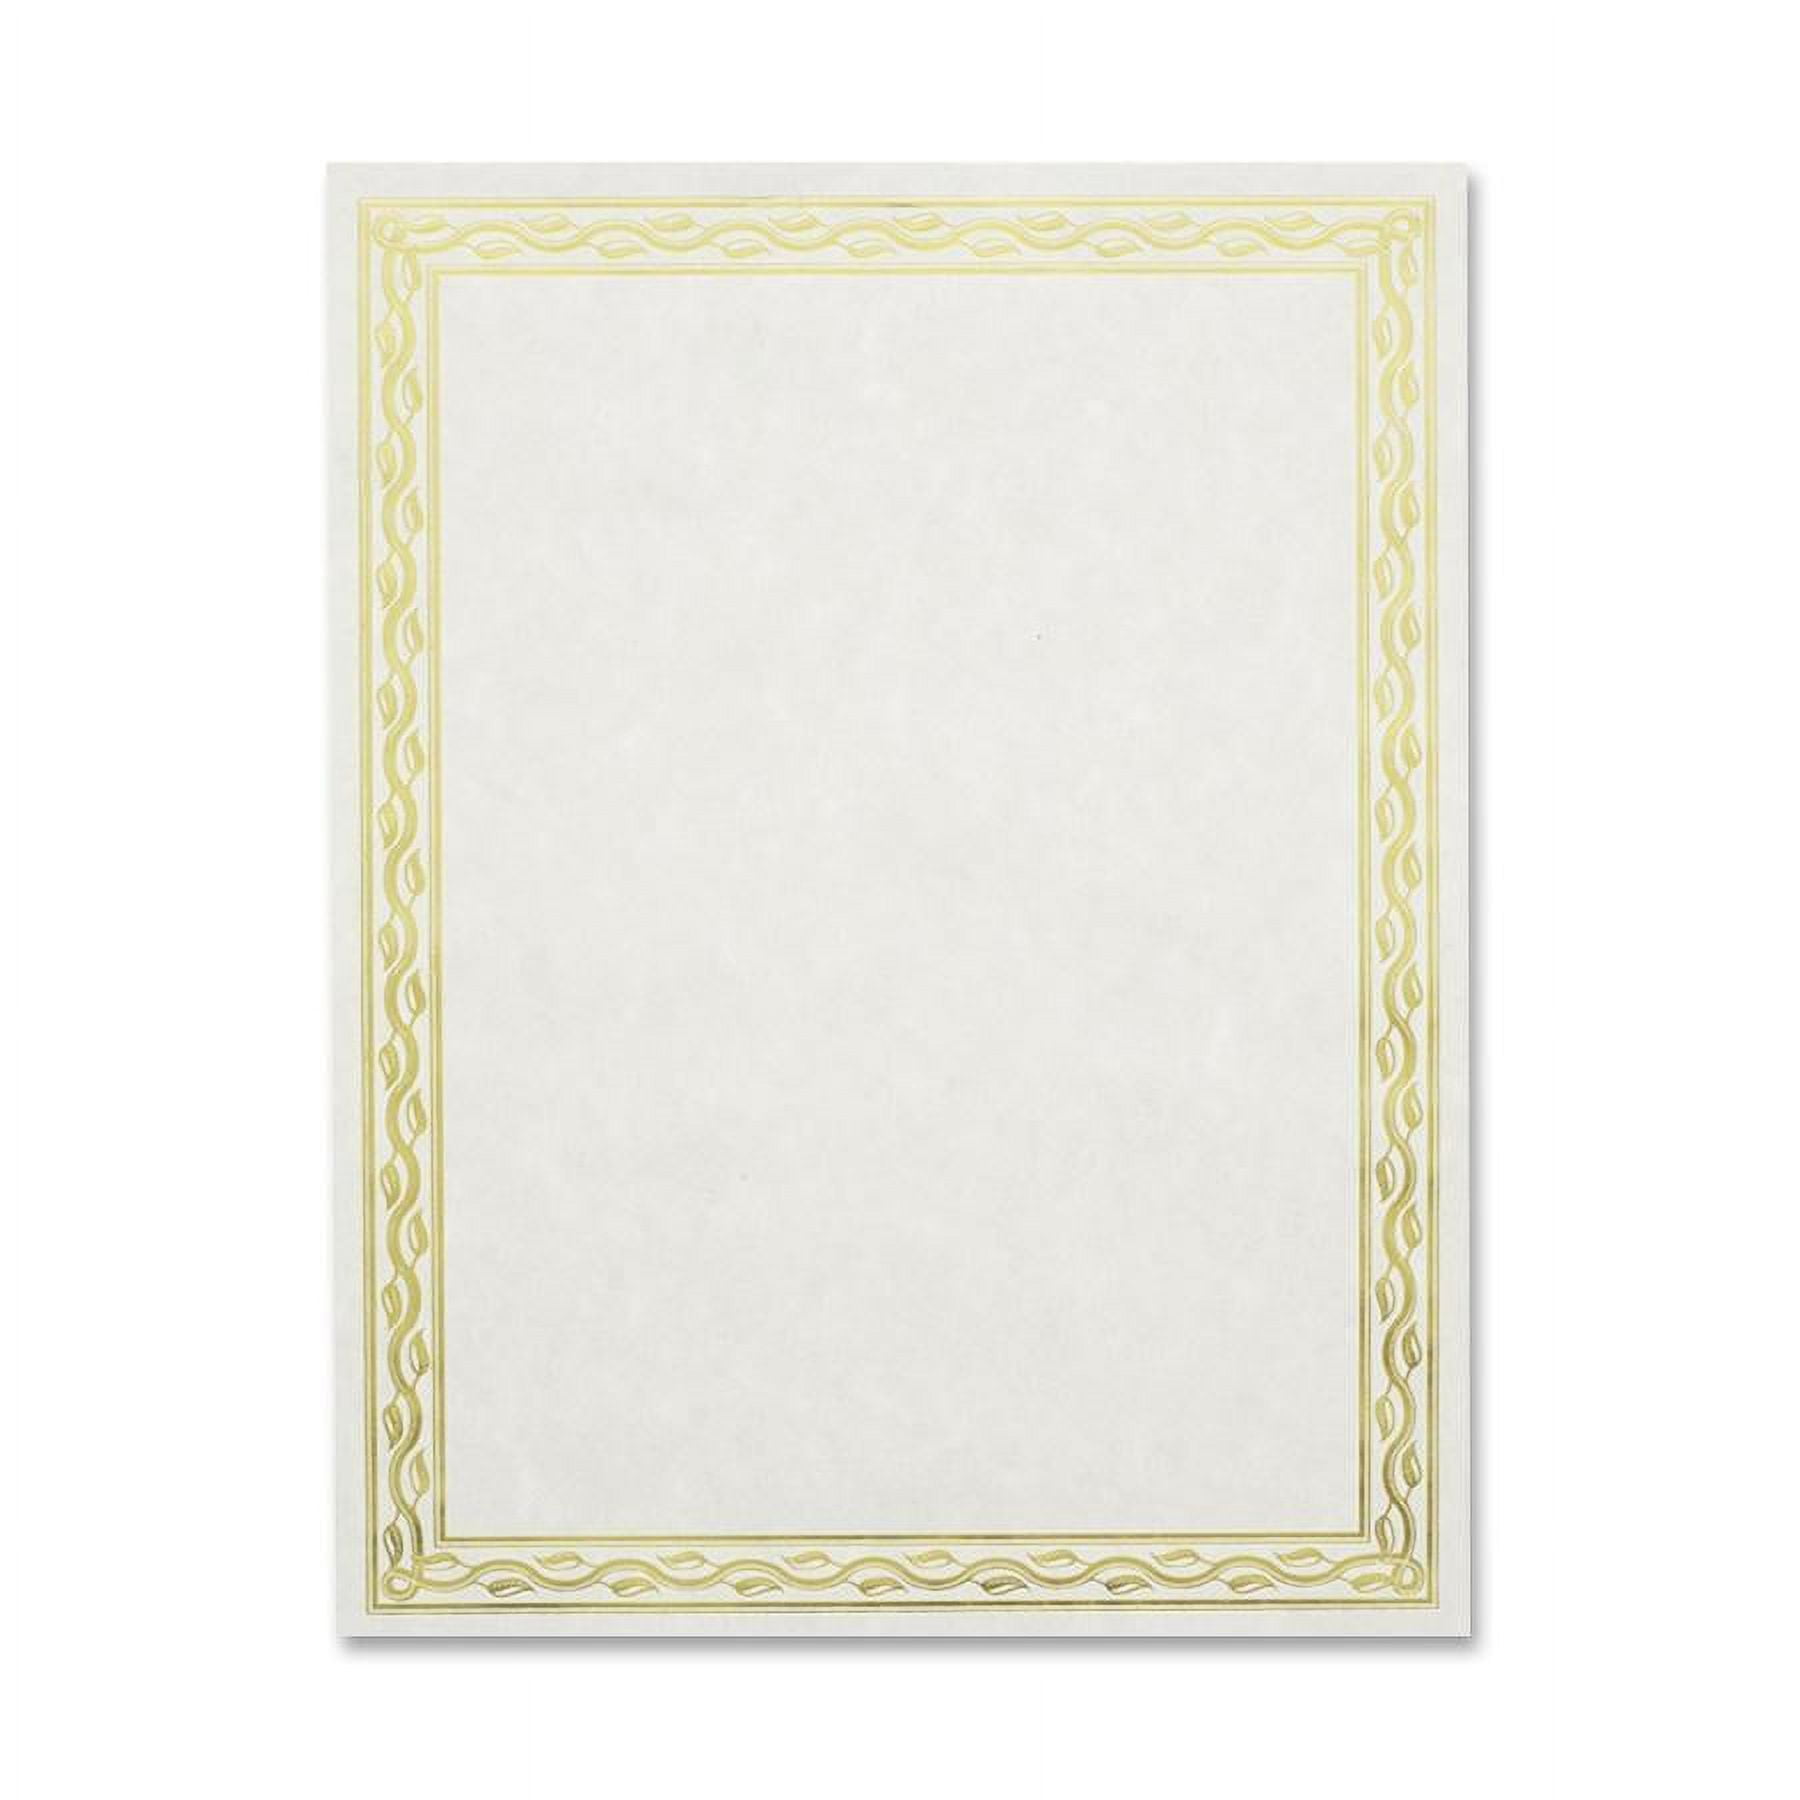 50 Sheet Award Certificate Paper, Gold Foil Metallic Border, Ivory Letter Size Blank Paper, by Better Office Products, Diploma Certificate Paper